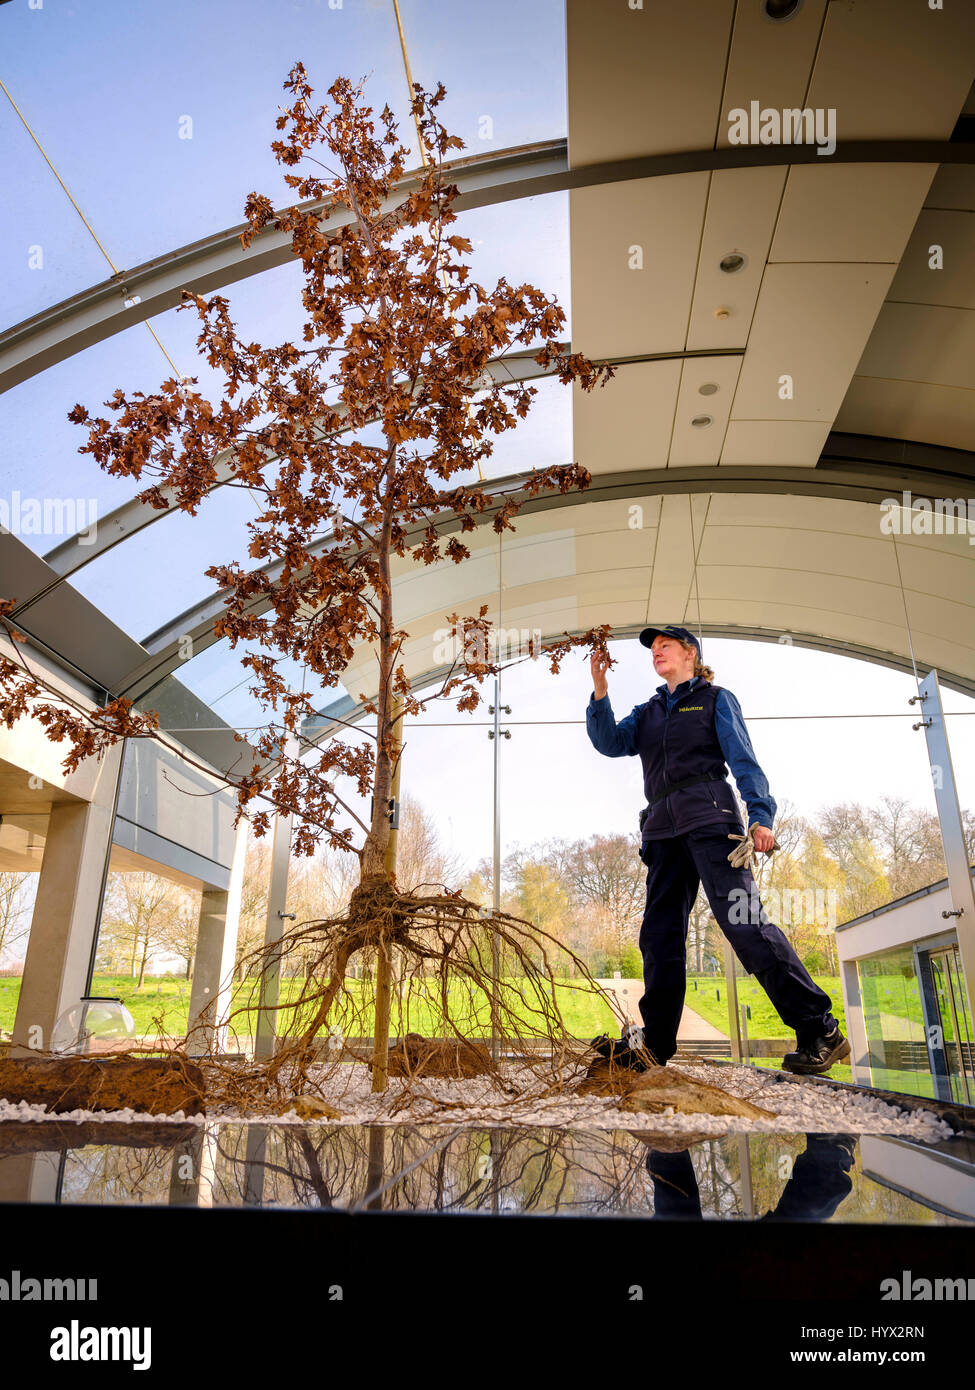 Wakehurst, UK. 7th April, 2017. Wakehurst - Royal Botanic Gardens. Launch of new exhibition at the Millennium Seed Bank - Secret Structures runs from now until March 2018 Botanical Horticulturalist Carol Hart with the Oak Tree exhibit which has recently featured on tv and is complete with root system on show. Credit: Jim Holden/Alamy Live News Stock Photo